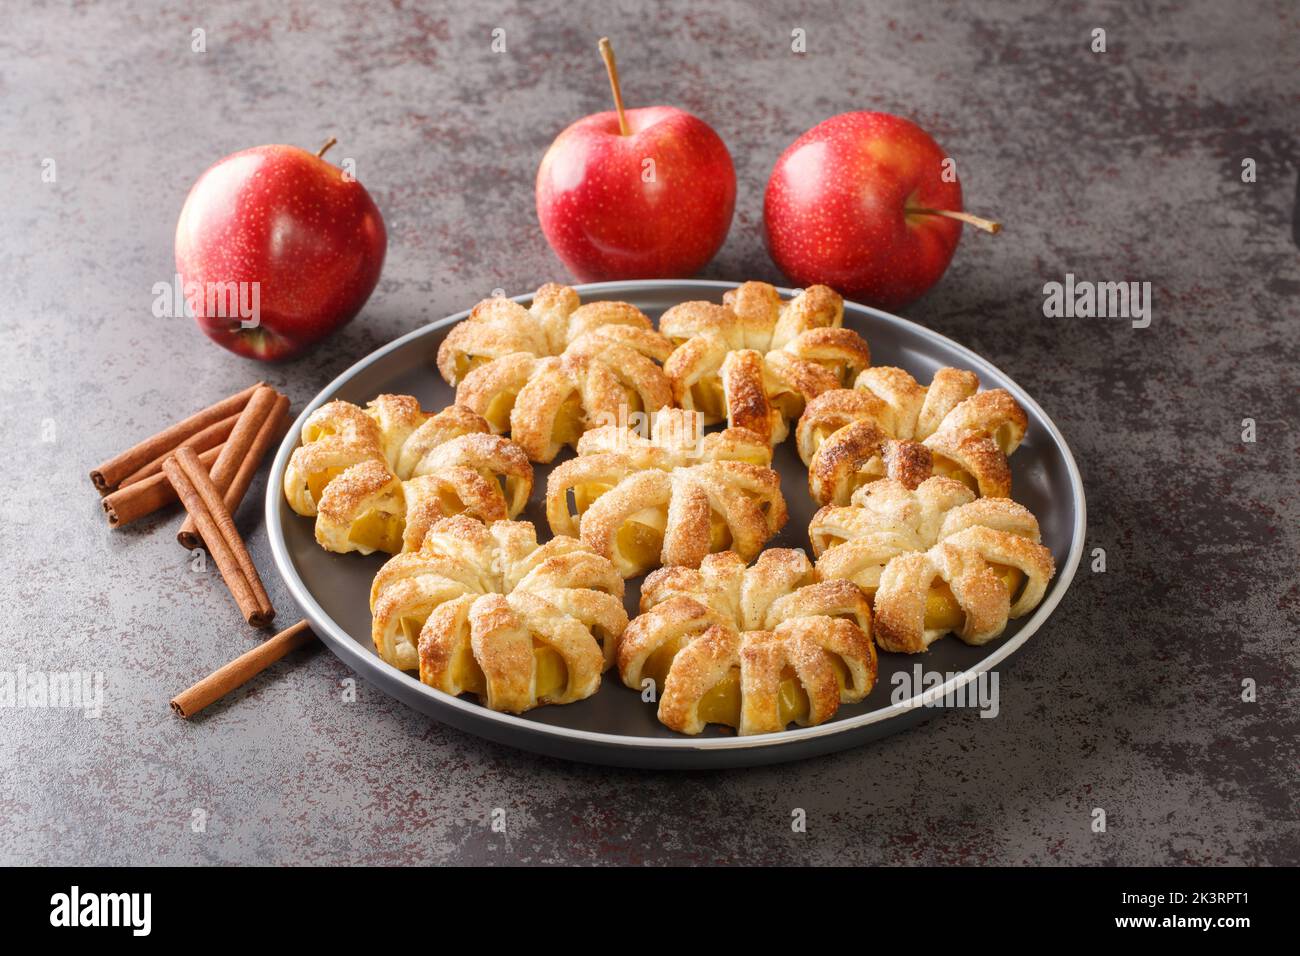 Dessert flower Apple rings in puff pastry with sugar and cinnamon close-up in a plate on the table. Horizontal Stock Photo